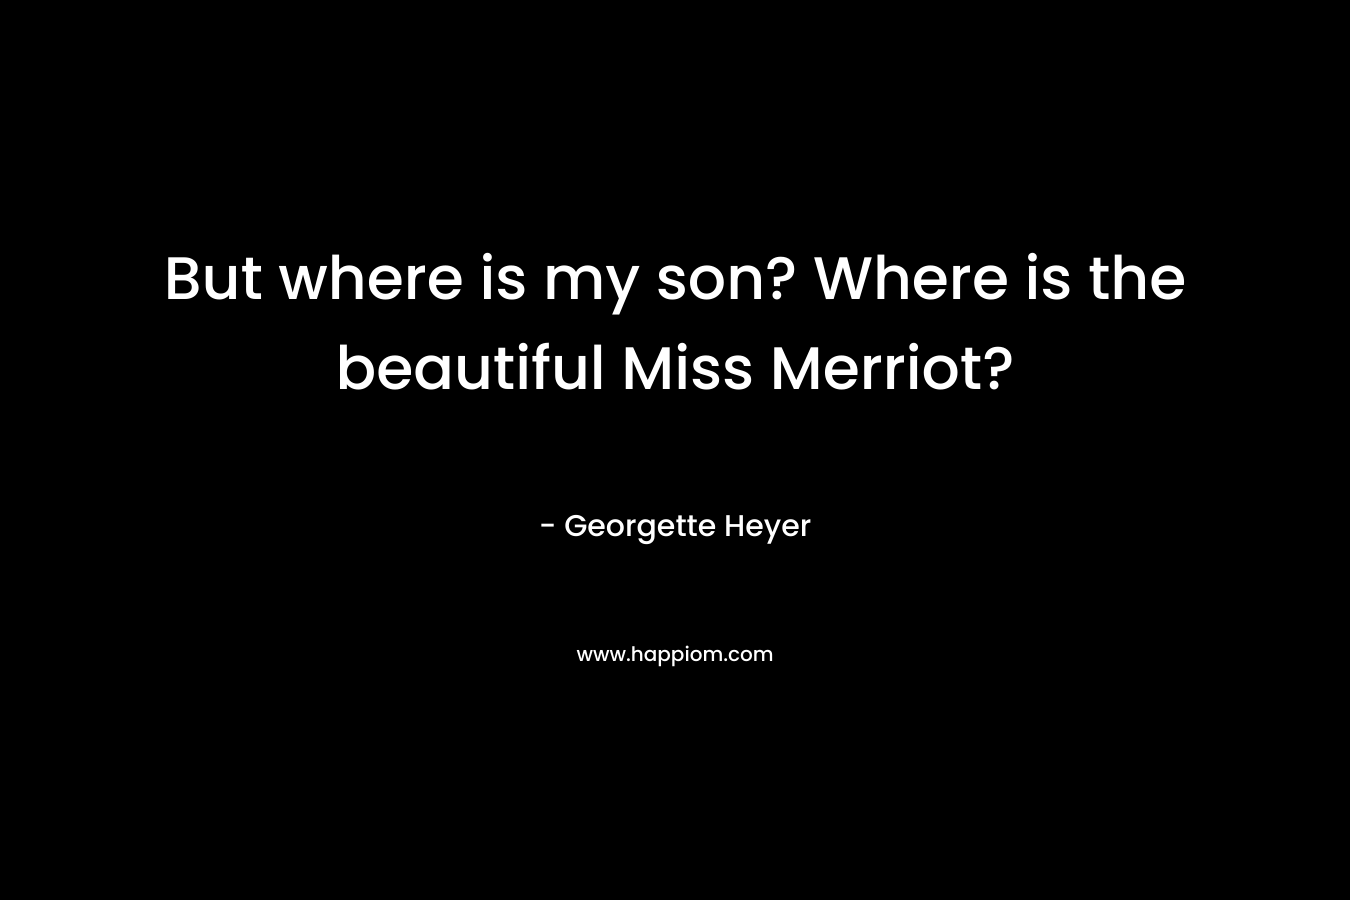 But where is my son? Where is the beautiful Miss Merriot?